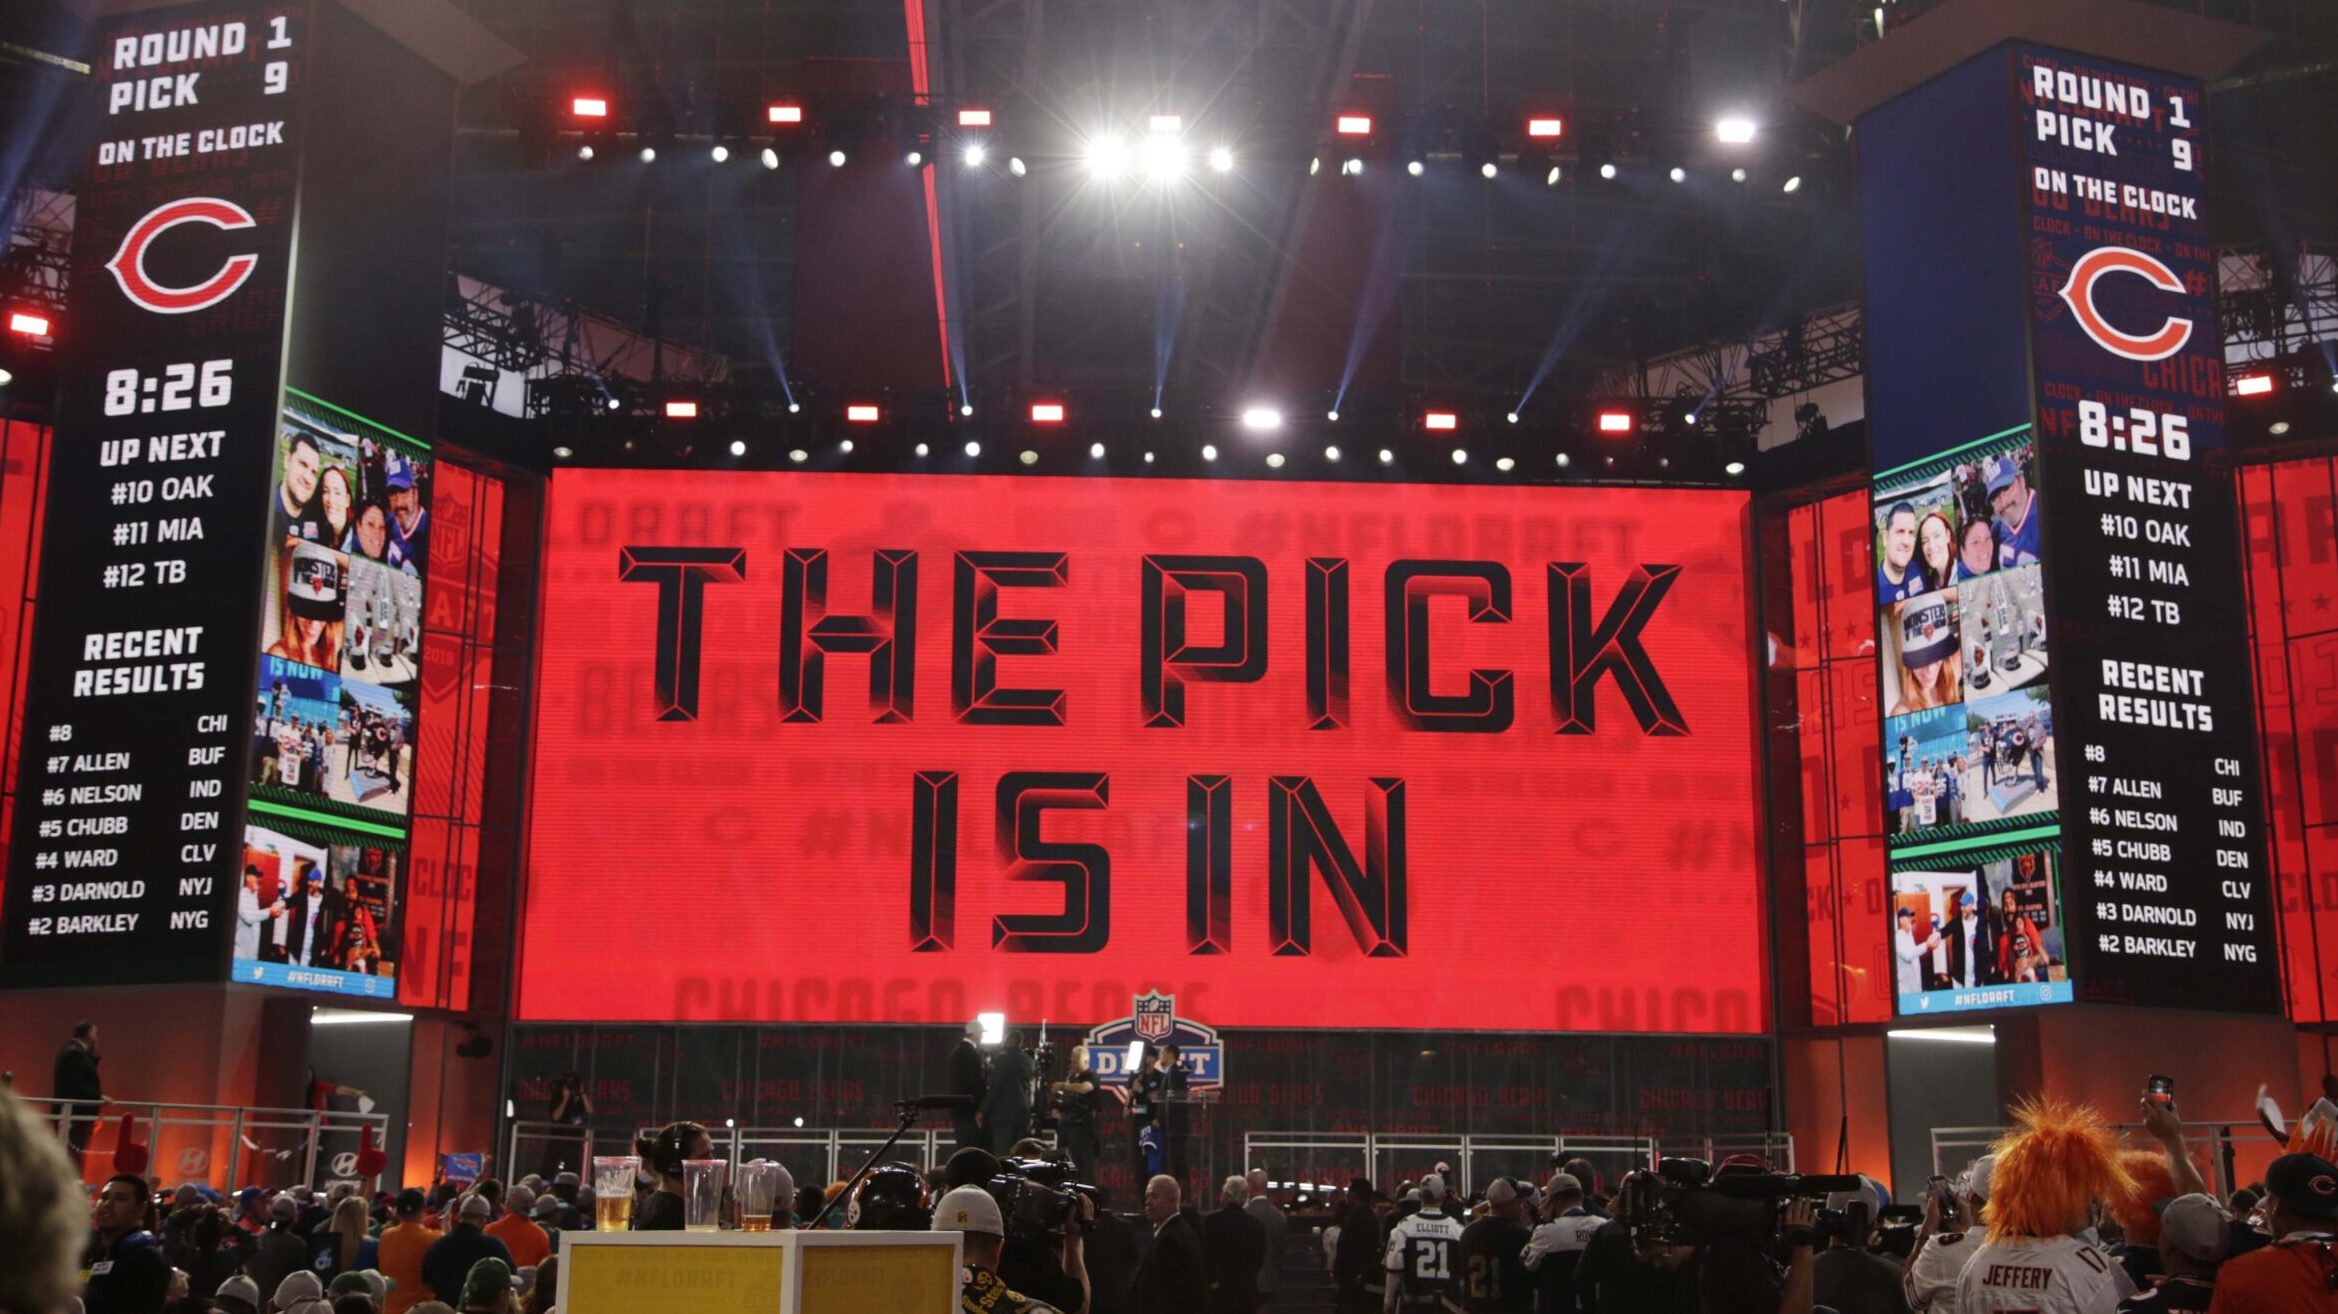 Bears "pick is in" at the 2018 NFL Draft